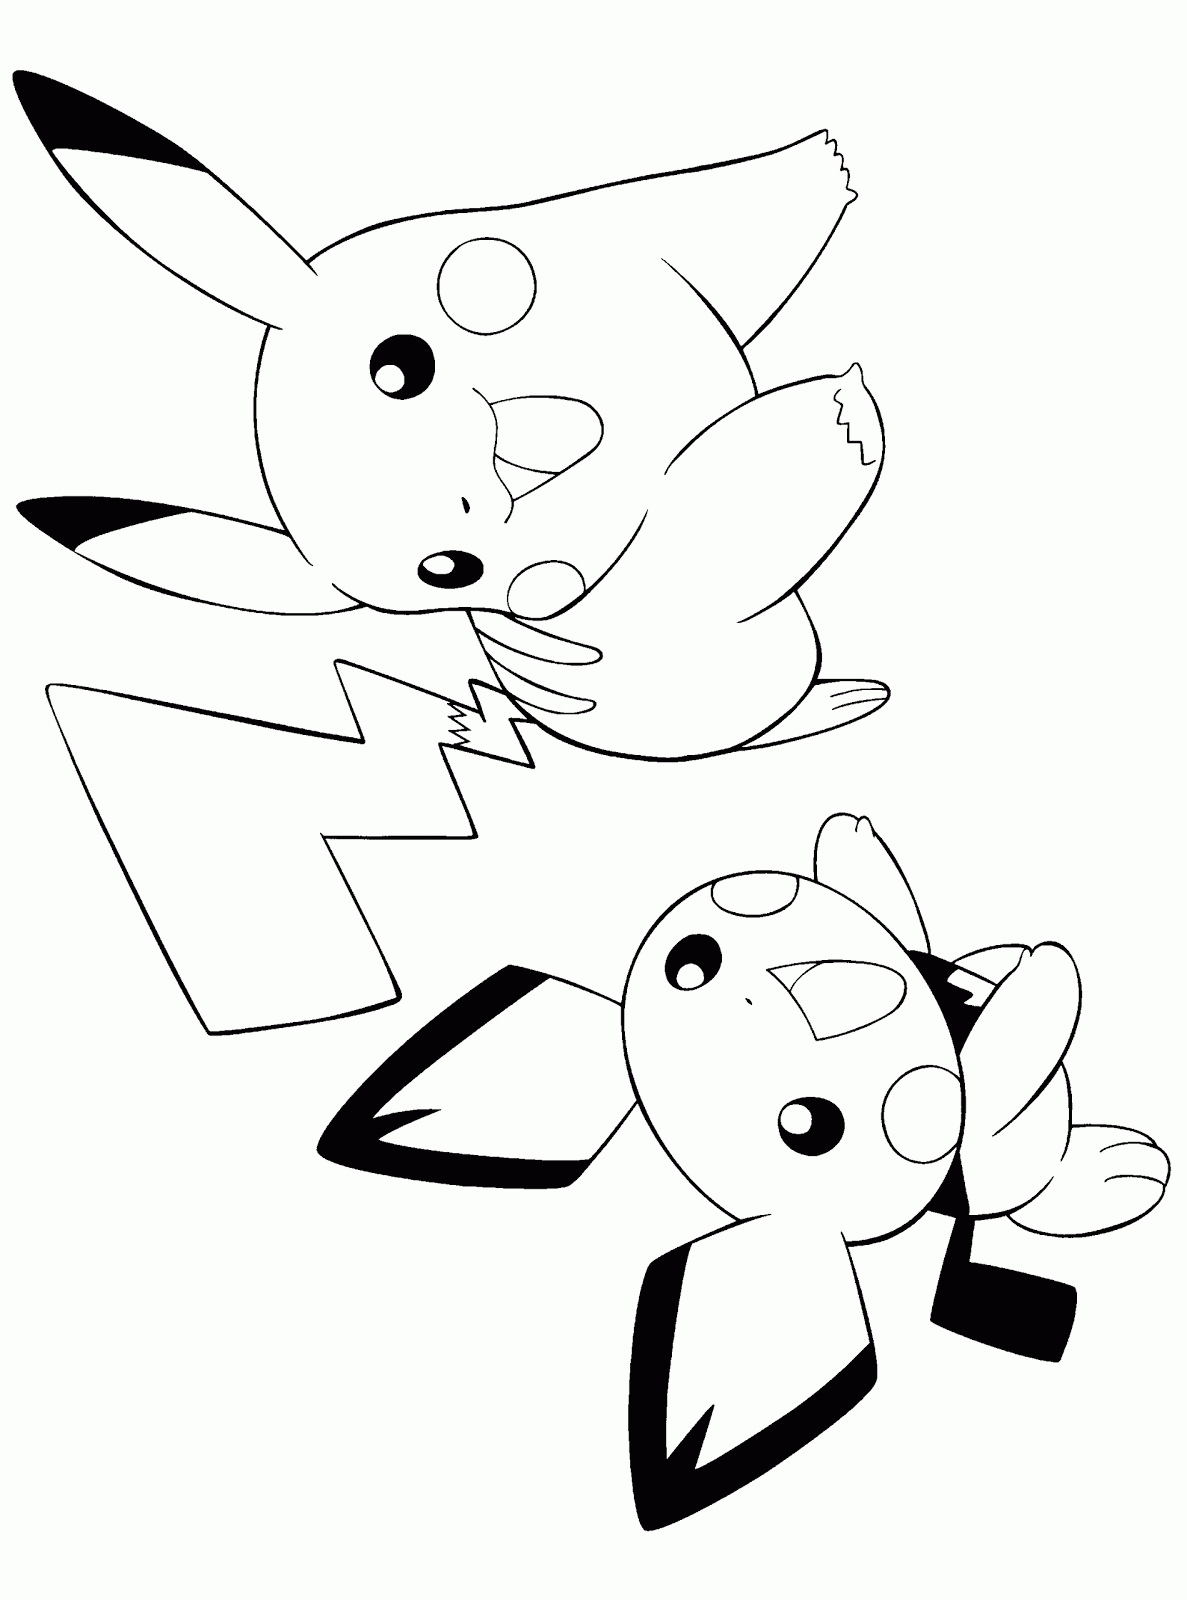 coloring pokemon pages pokemon coloring pages join your favorite pokemon on an pokemon coloring pages 1 1